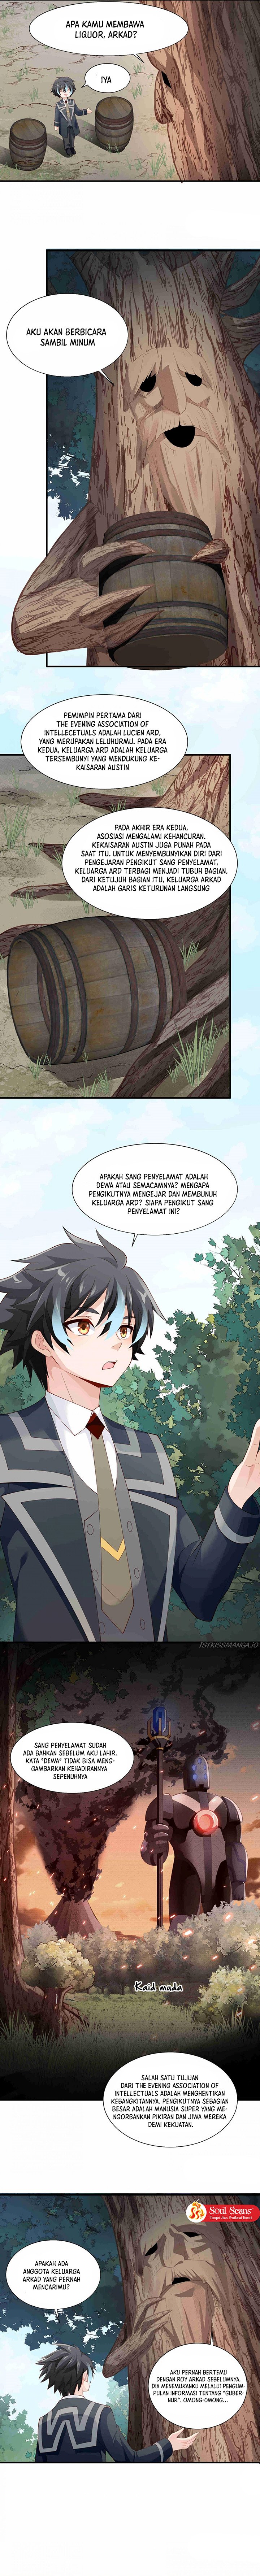 Dilarang COPAS - situs resmi www.mangacanblog.com - Komik little tyrant doesnt want to meet with a bad end 054 - chapter 54 55 Indonesia little tyrant doesnt want to meet with a bad end 054 - chapter 54 Terbaru 8|Baca Manga Komik Indonesia|Mangacan